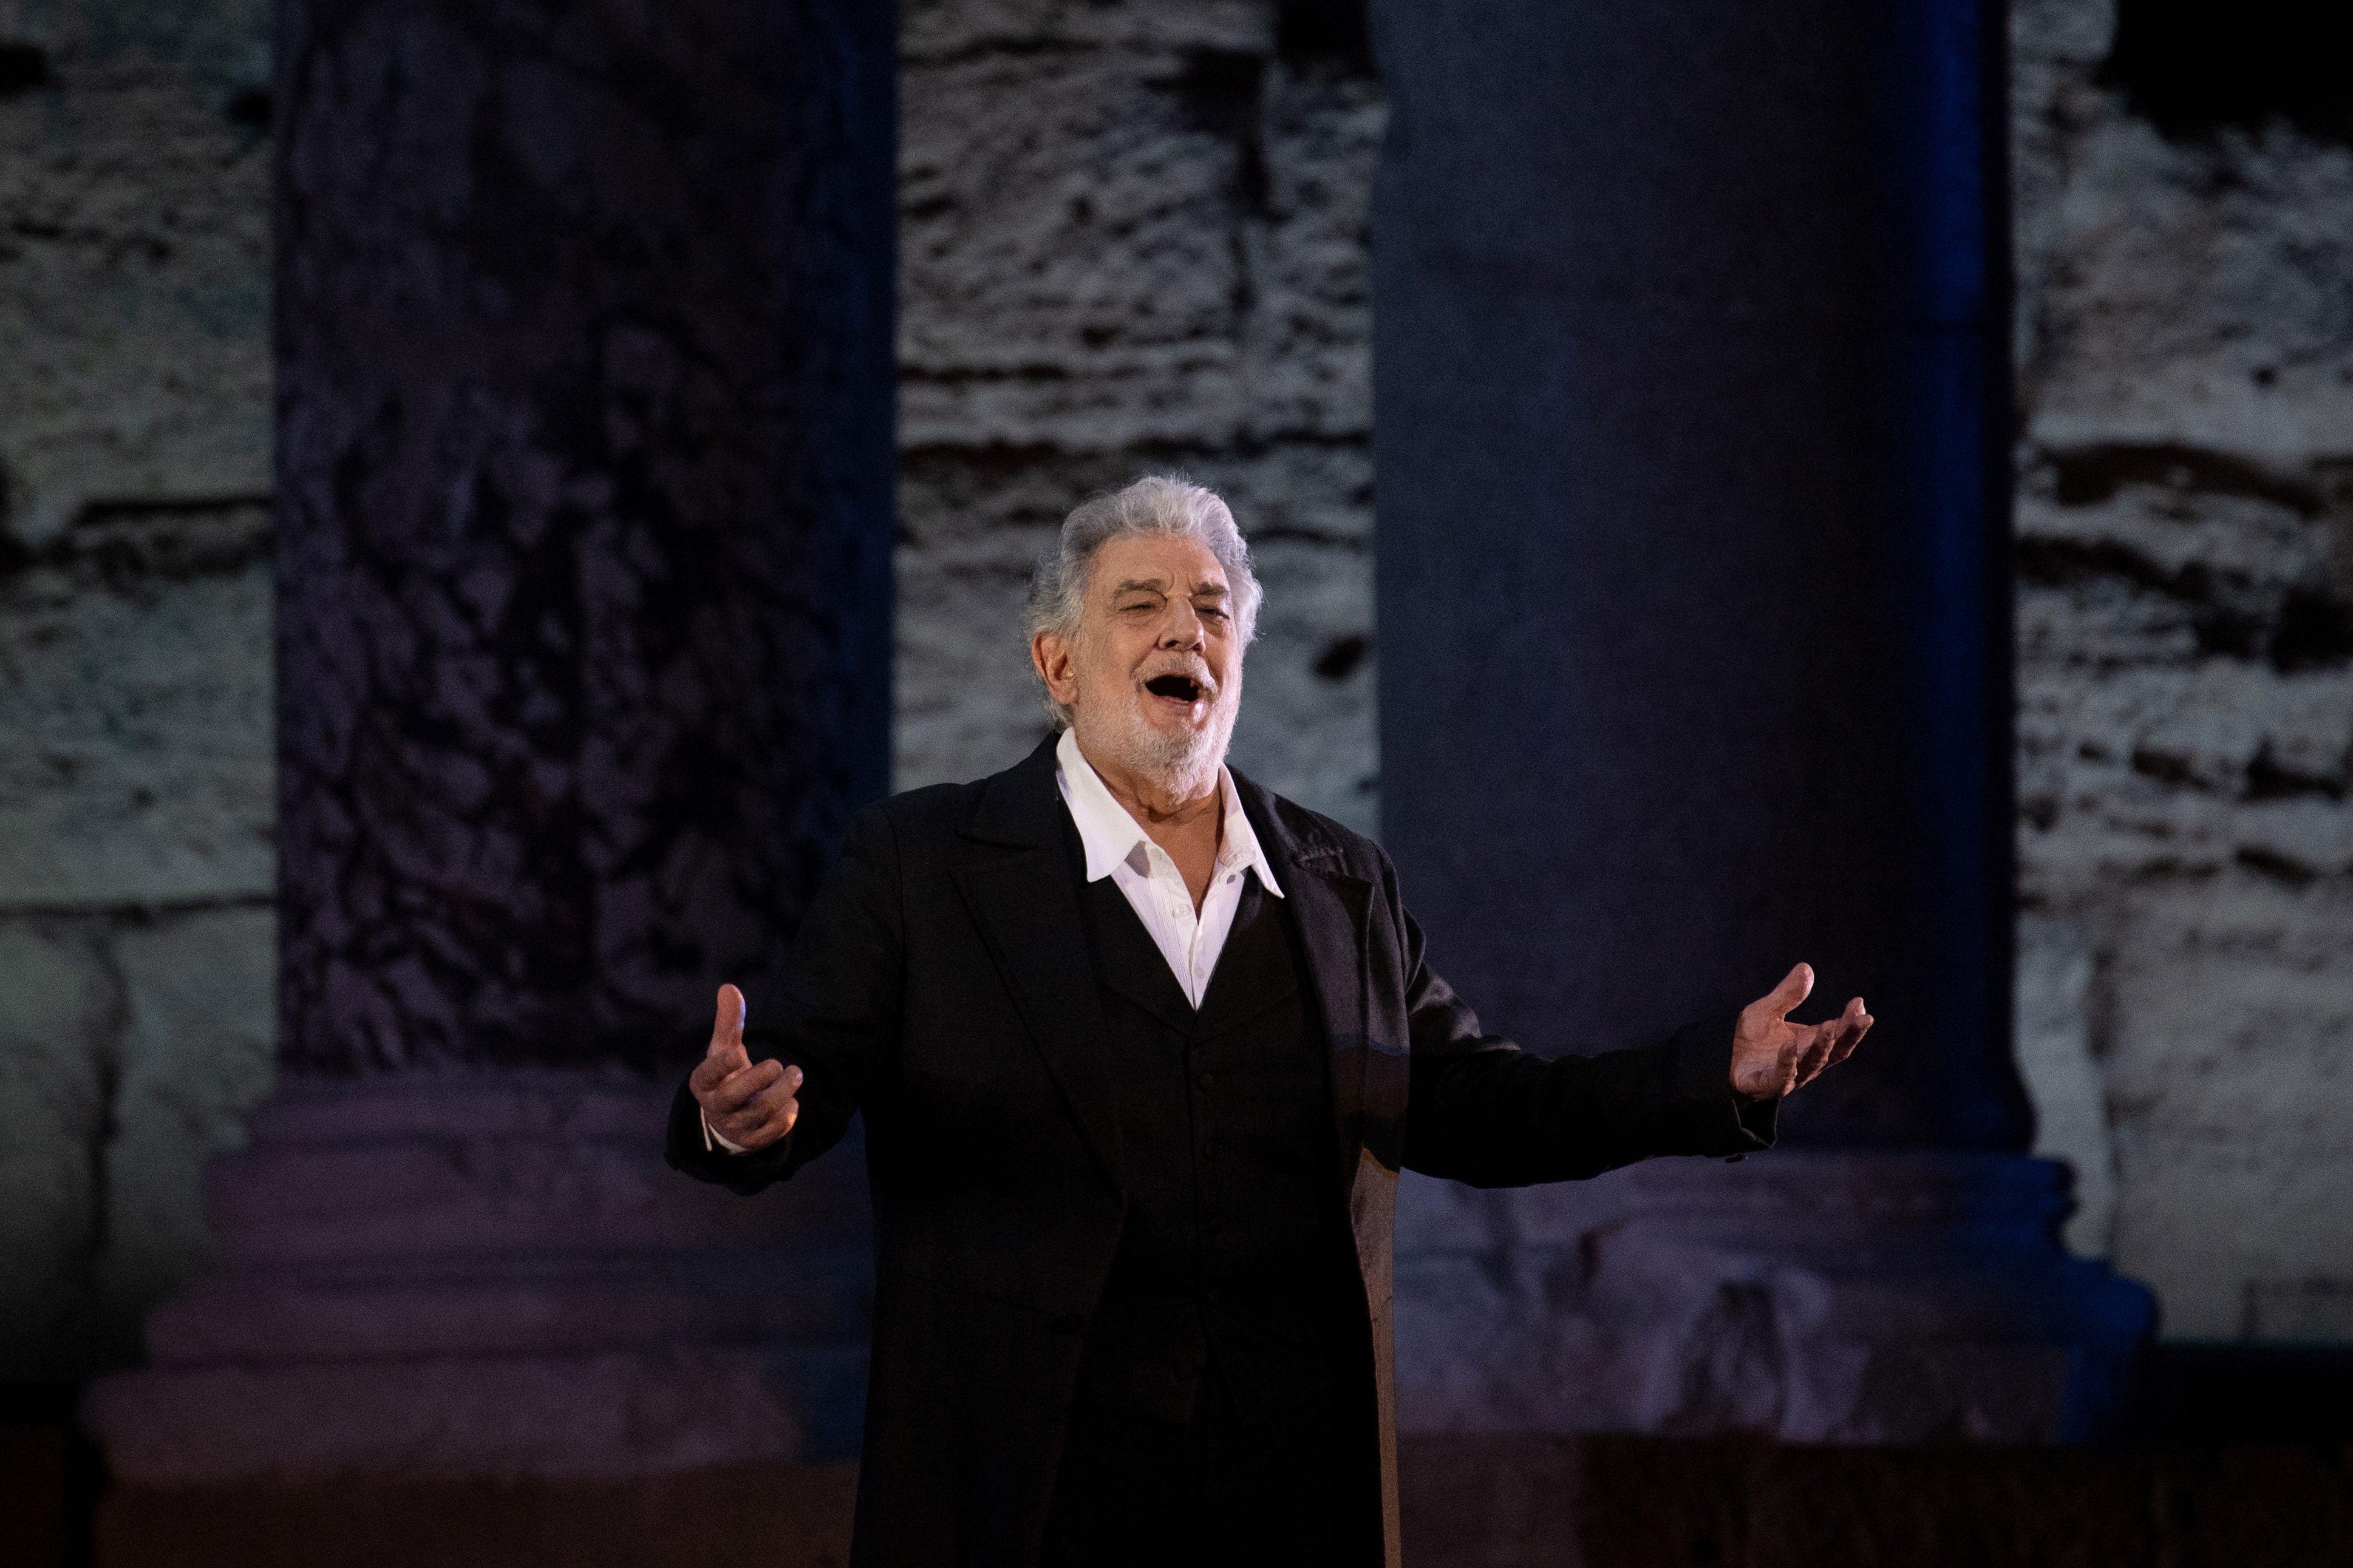 Placido Domingo stands alone on a stage, arms outstretched, mouth open.